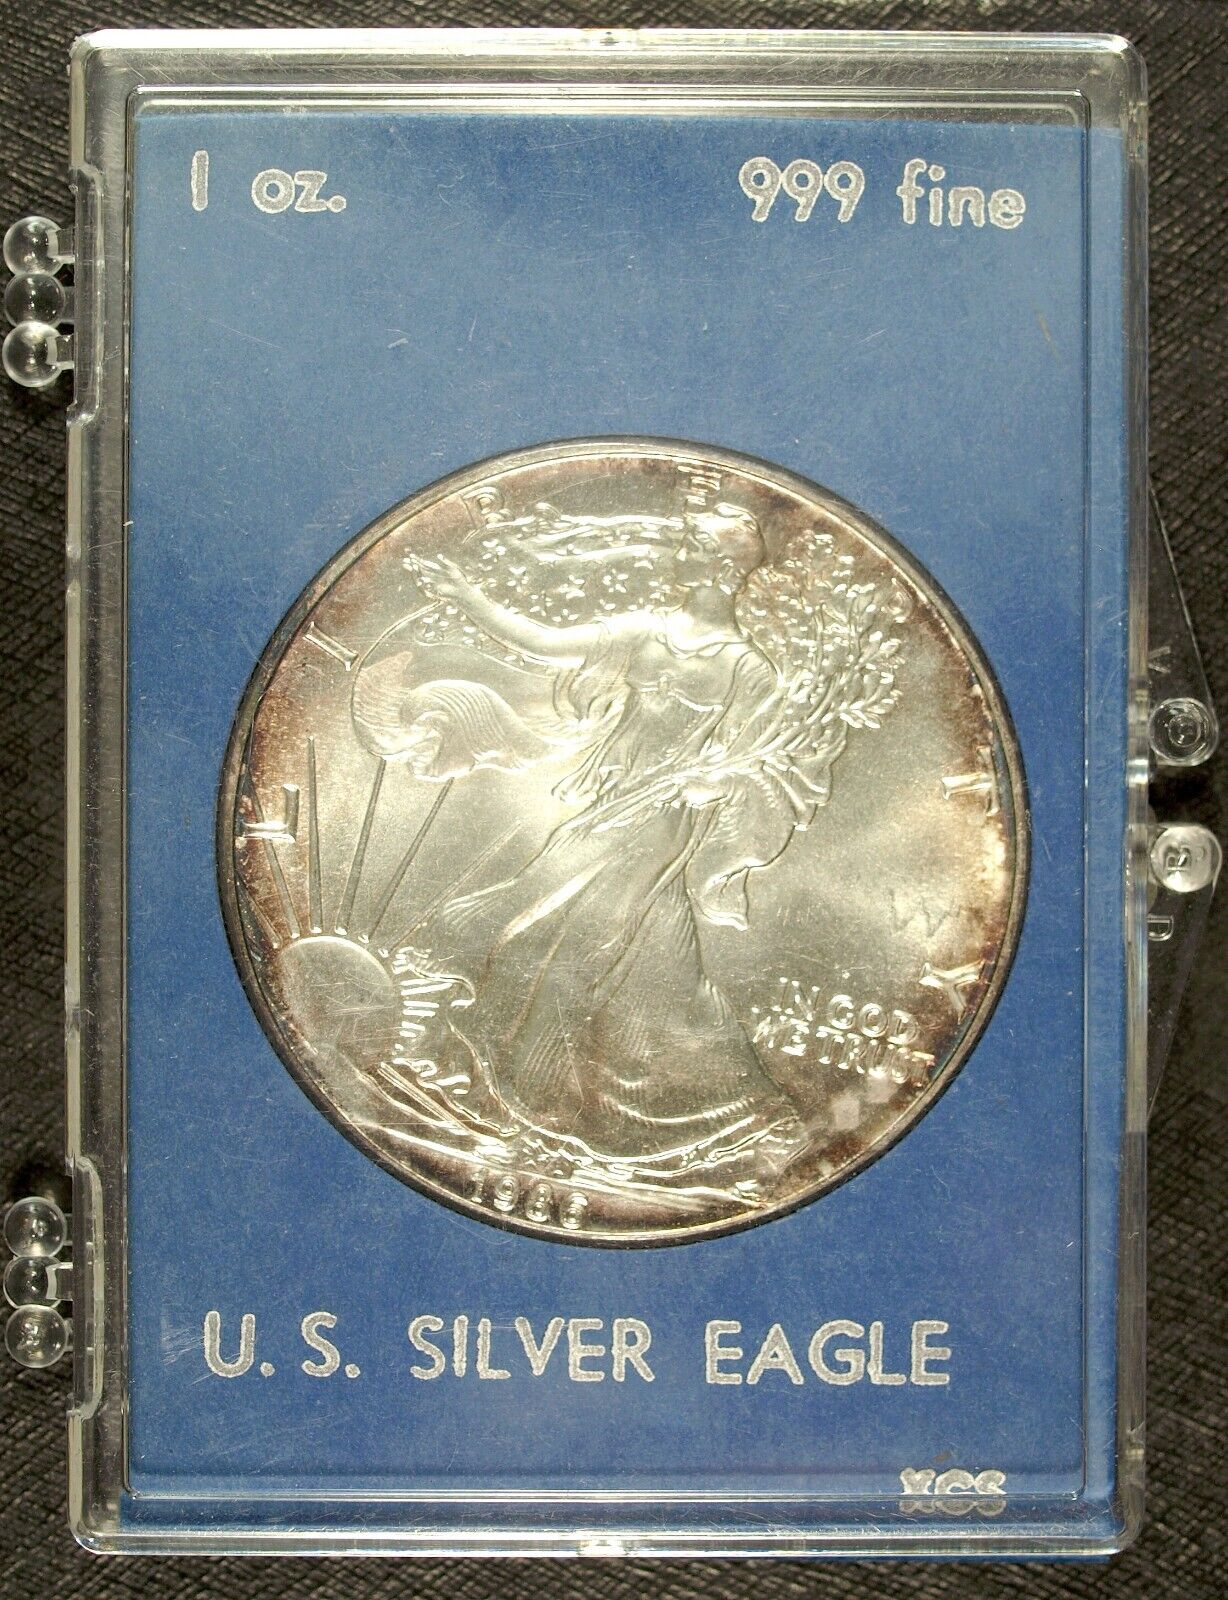 1986 U.S. Mint American Silver Eagle ☆☆ Uncirculated ☆☆ Great Collectible 604